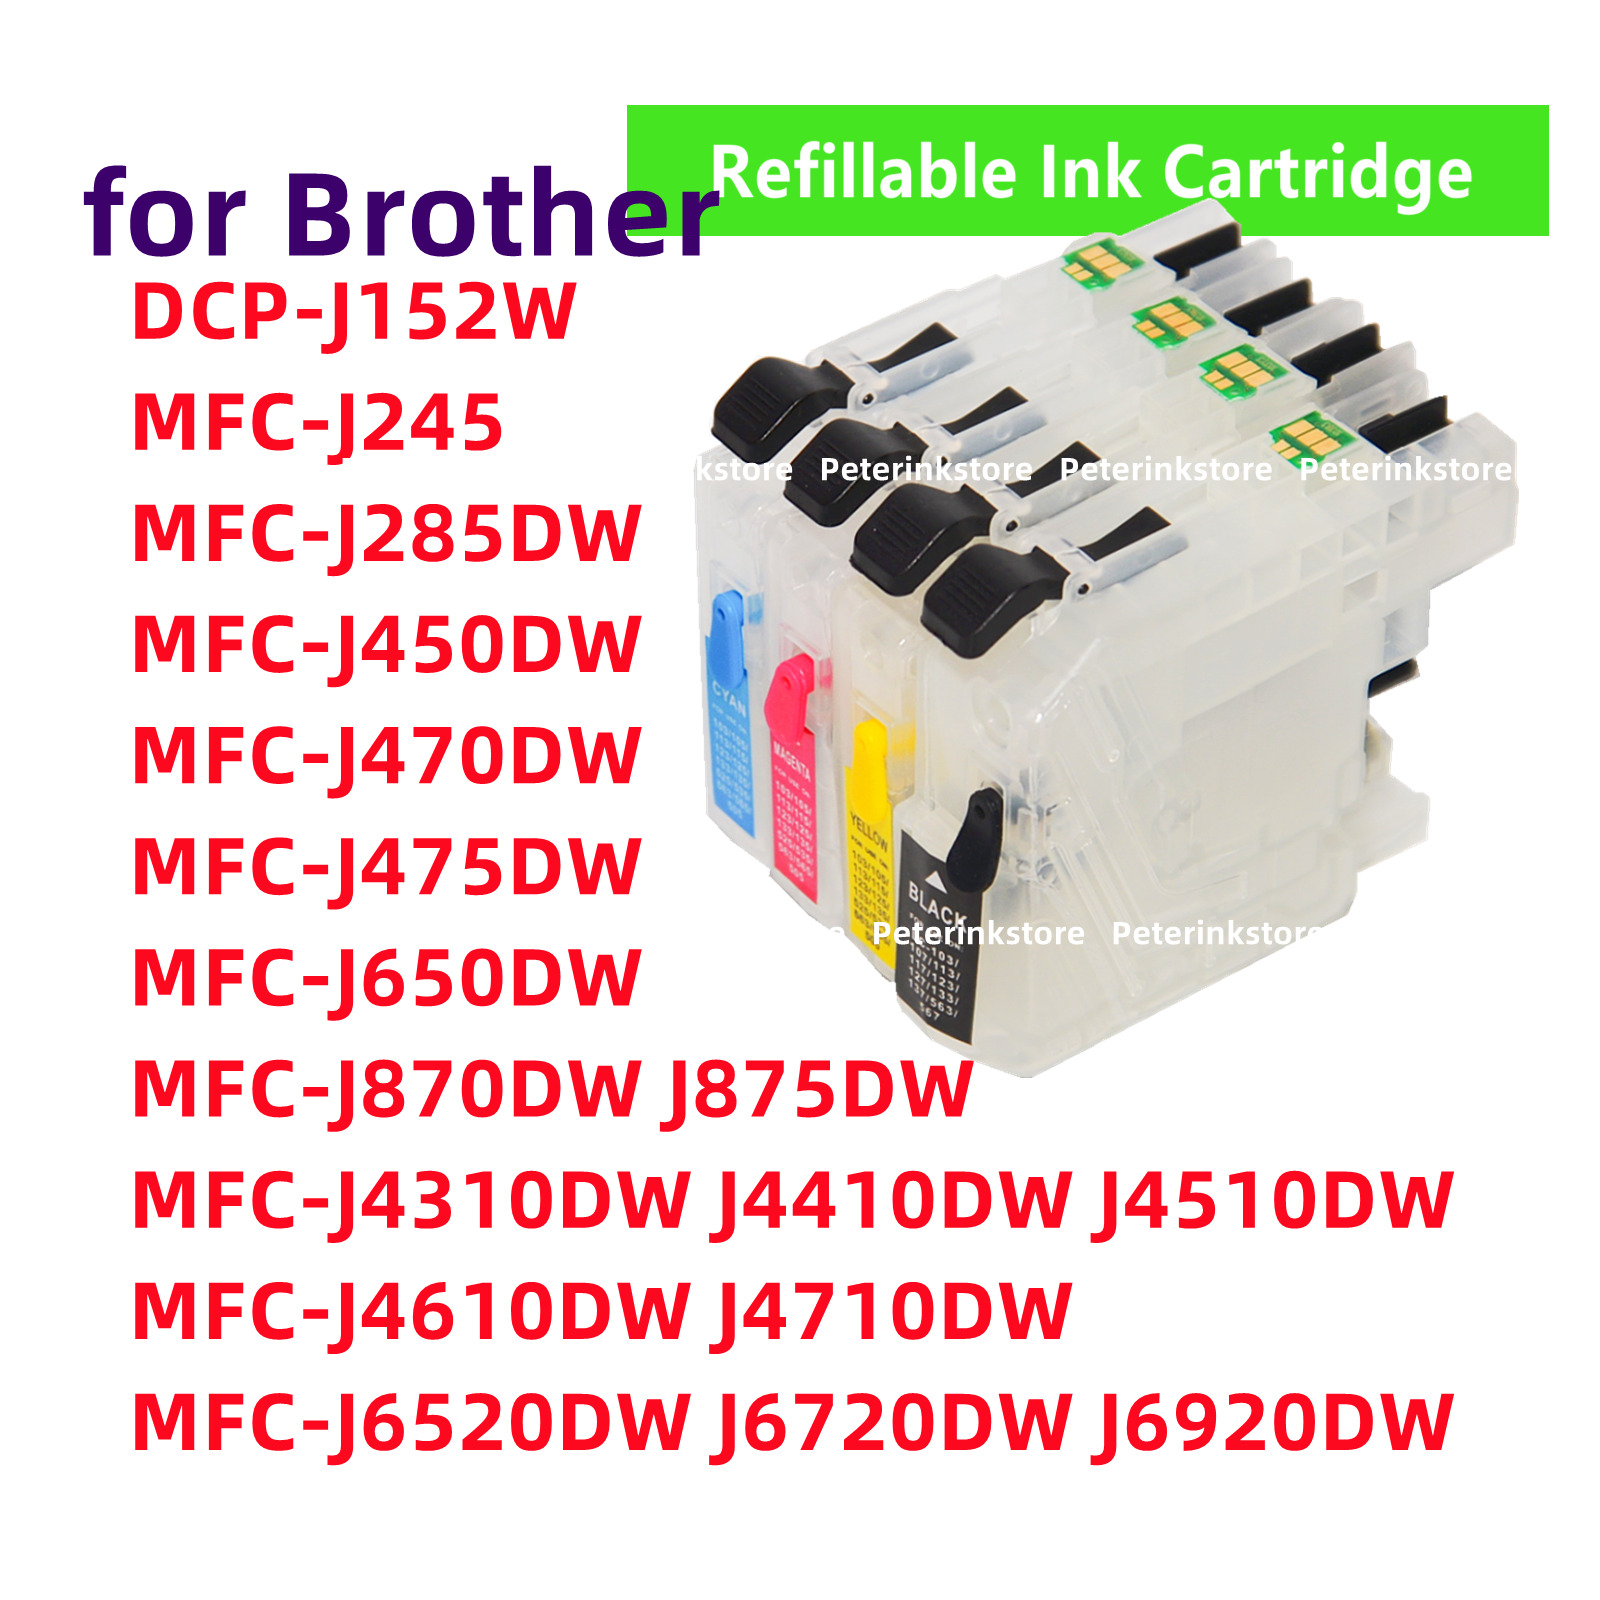 Refillable ink cartridge for Brother LC101 LC103 LC105 LC107 LC109 cartridges s